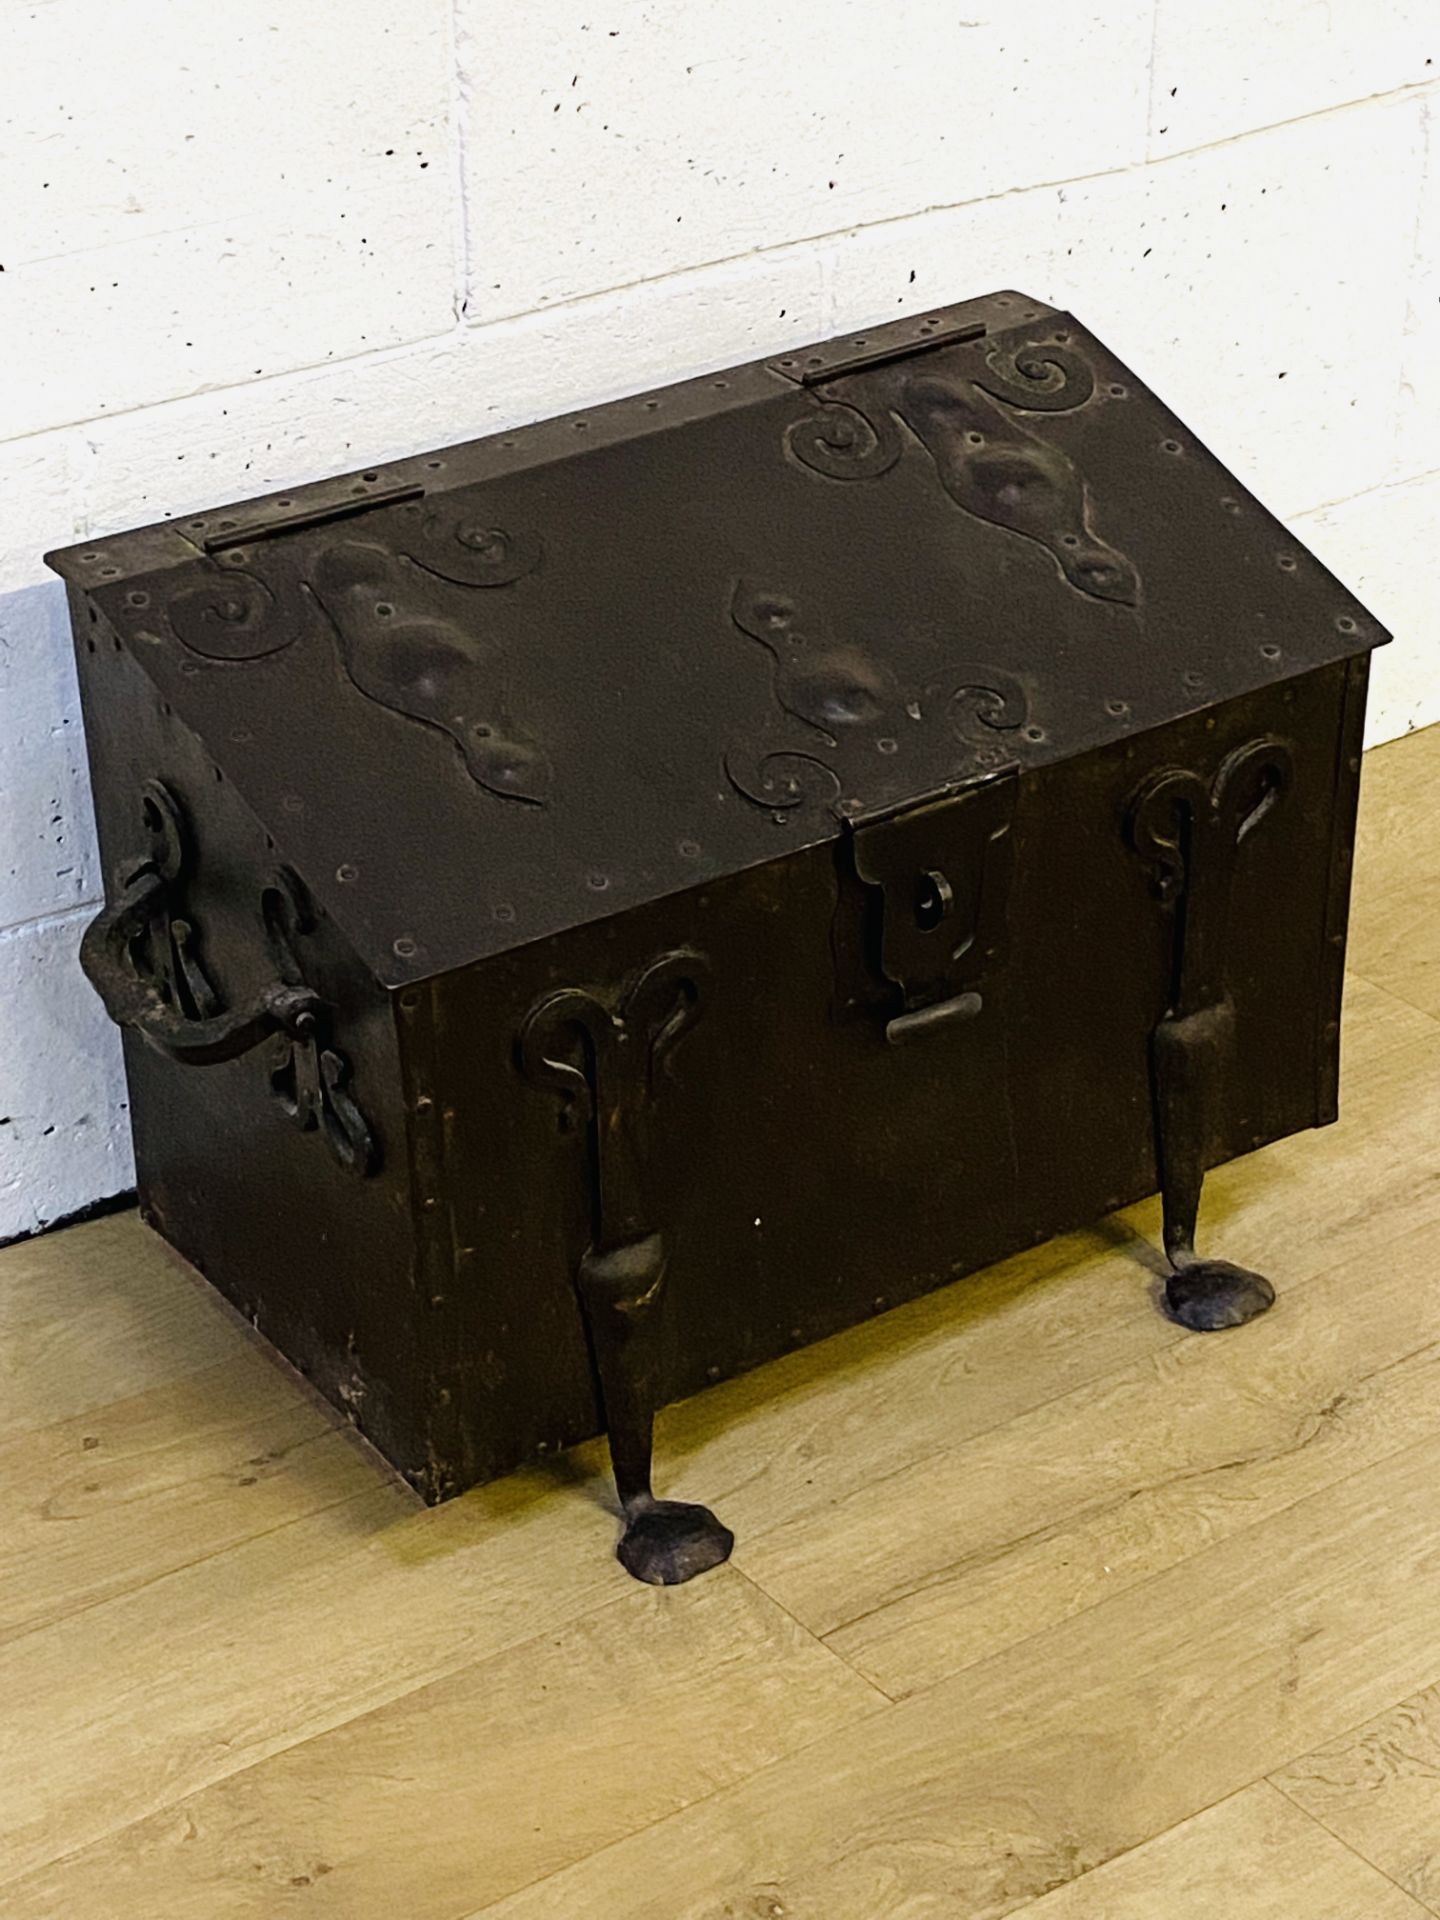 Arts and Crafts style steel coal box - Image 4 of 5